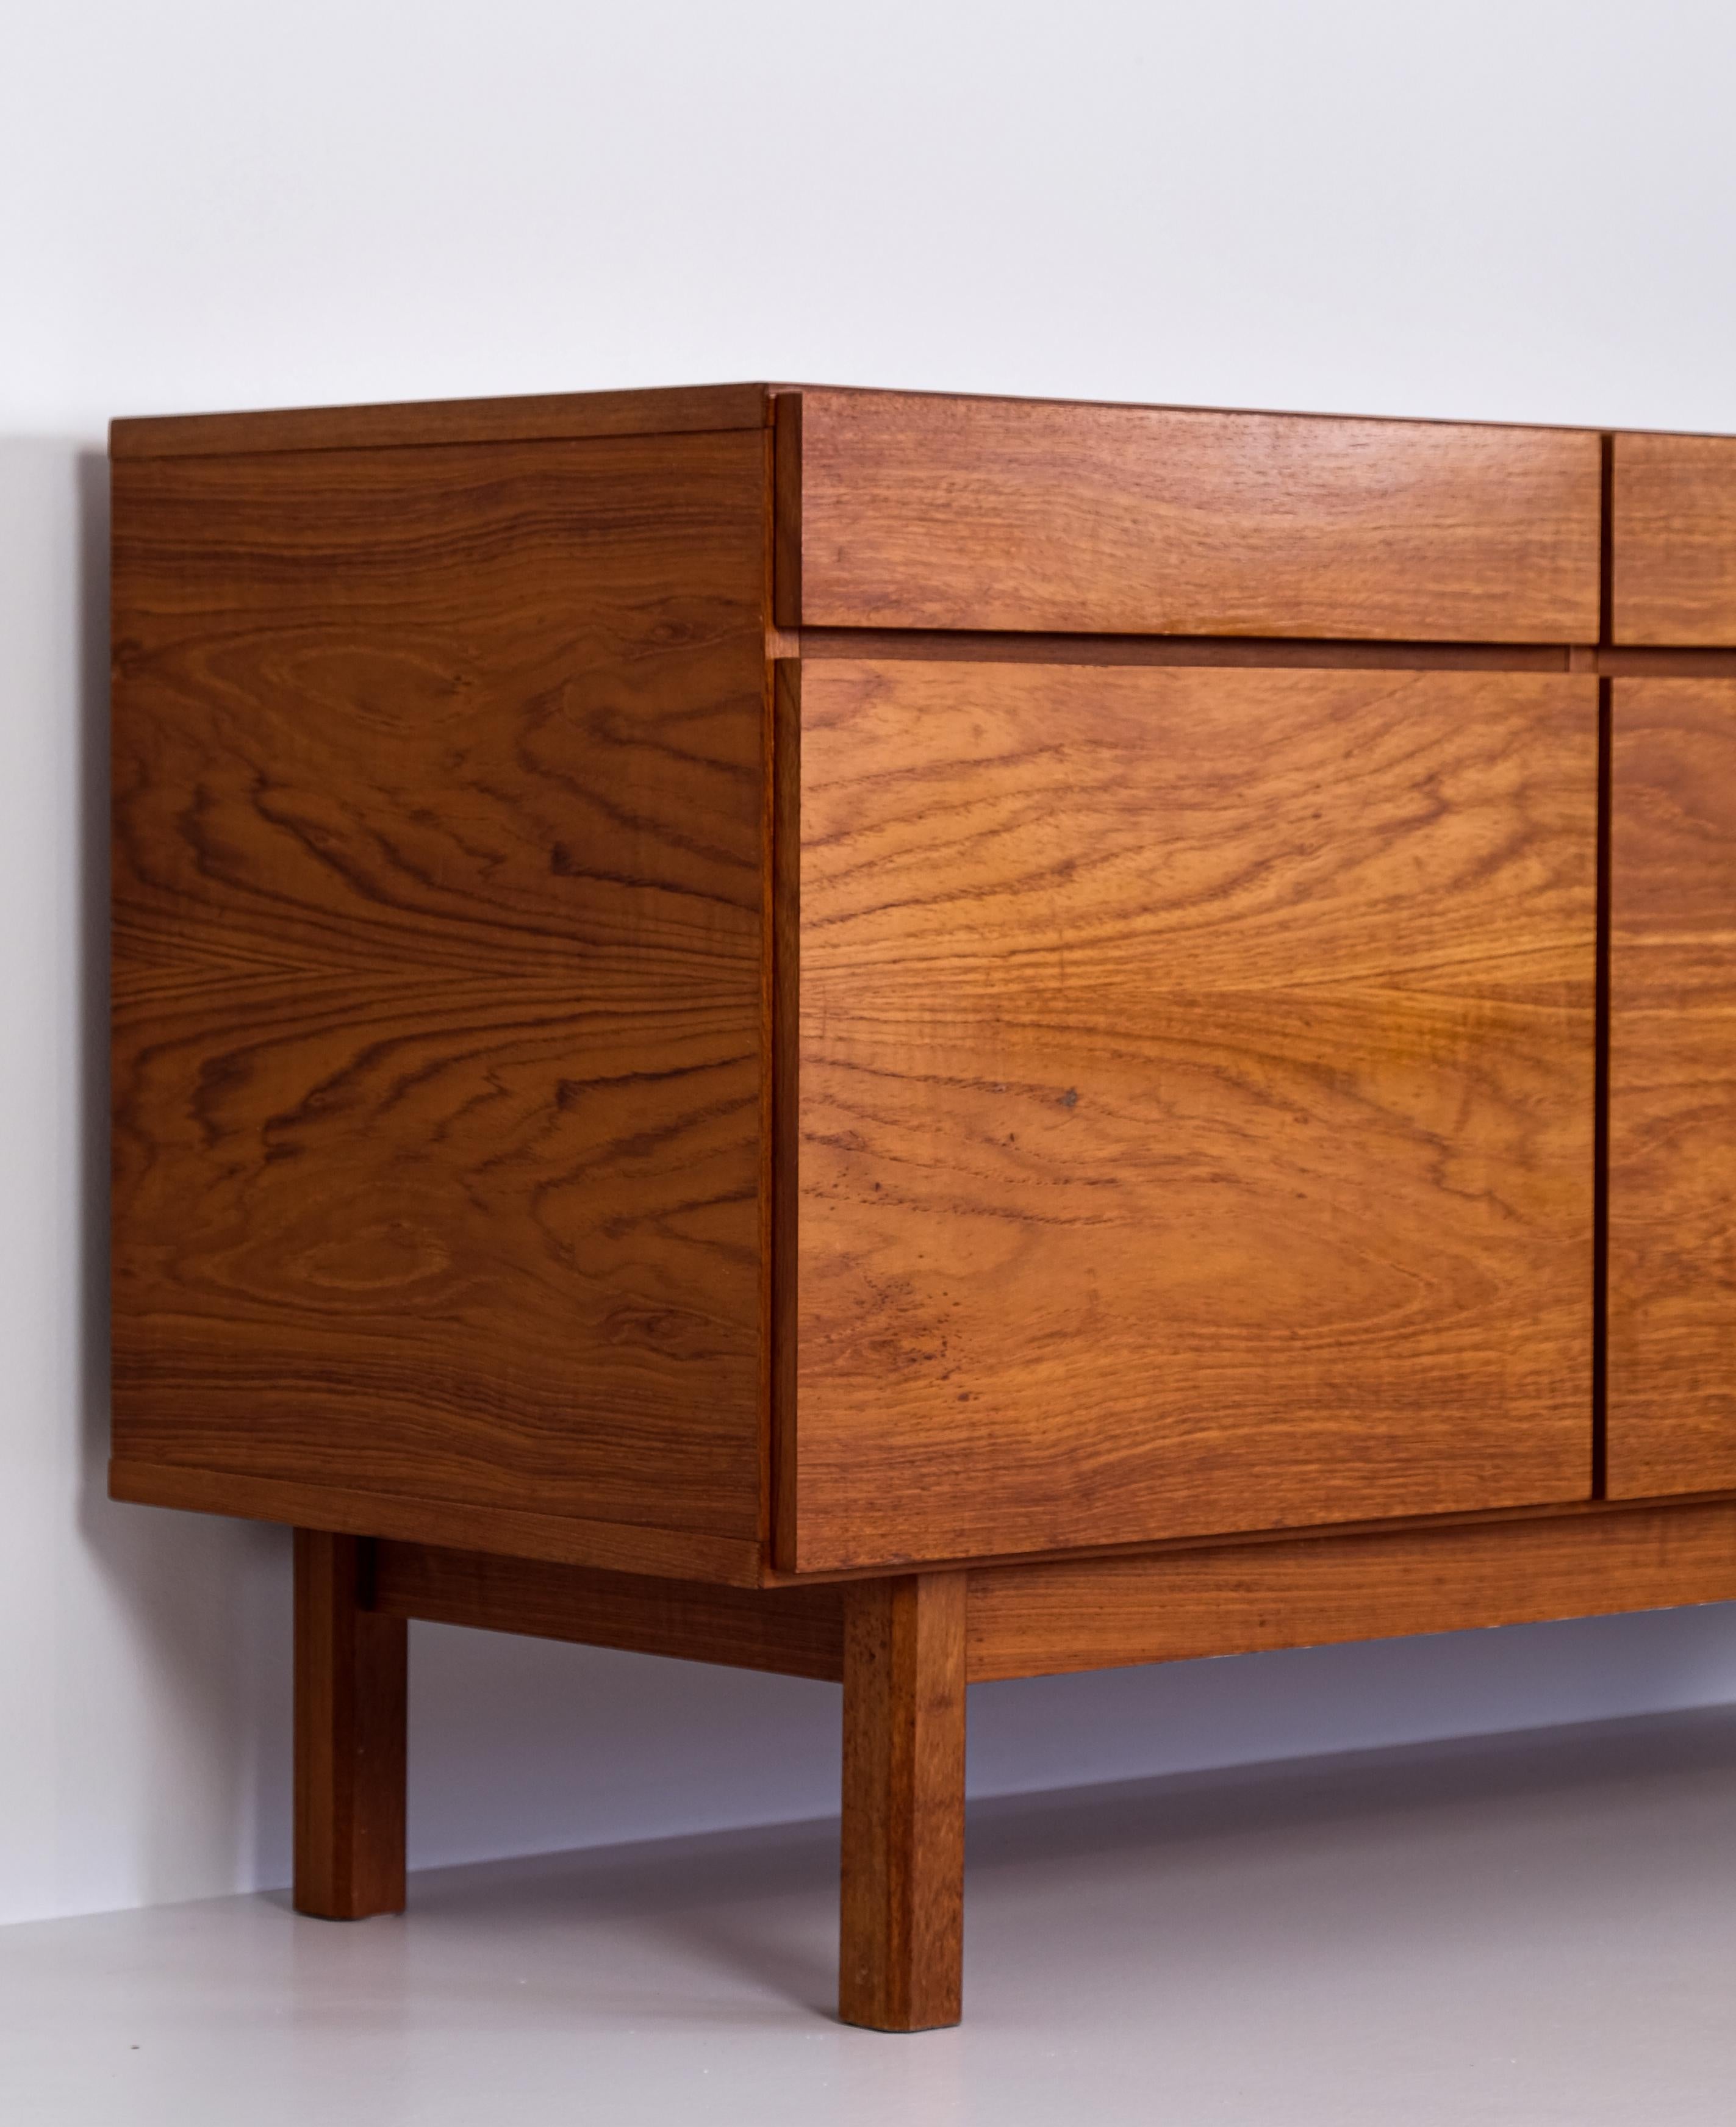 Very beautiful sideboard with fantastic walnut veneer with perfect grain.
Produced in Denmark, 1960s.